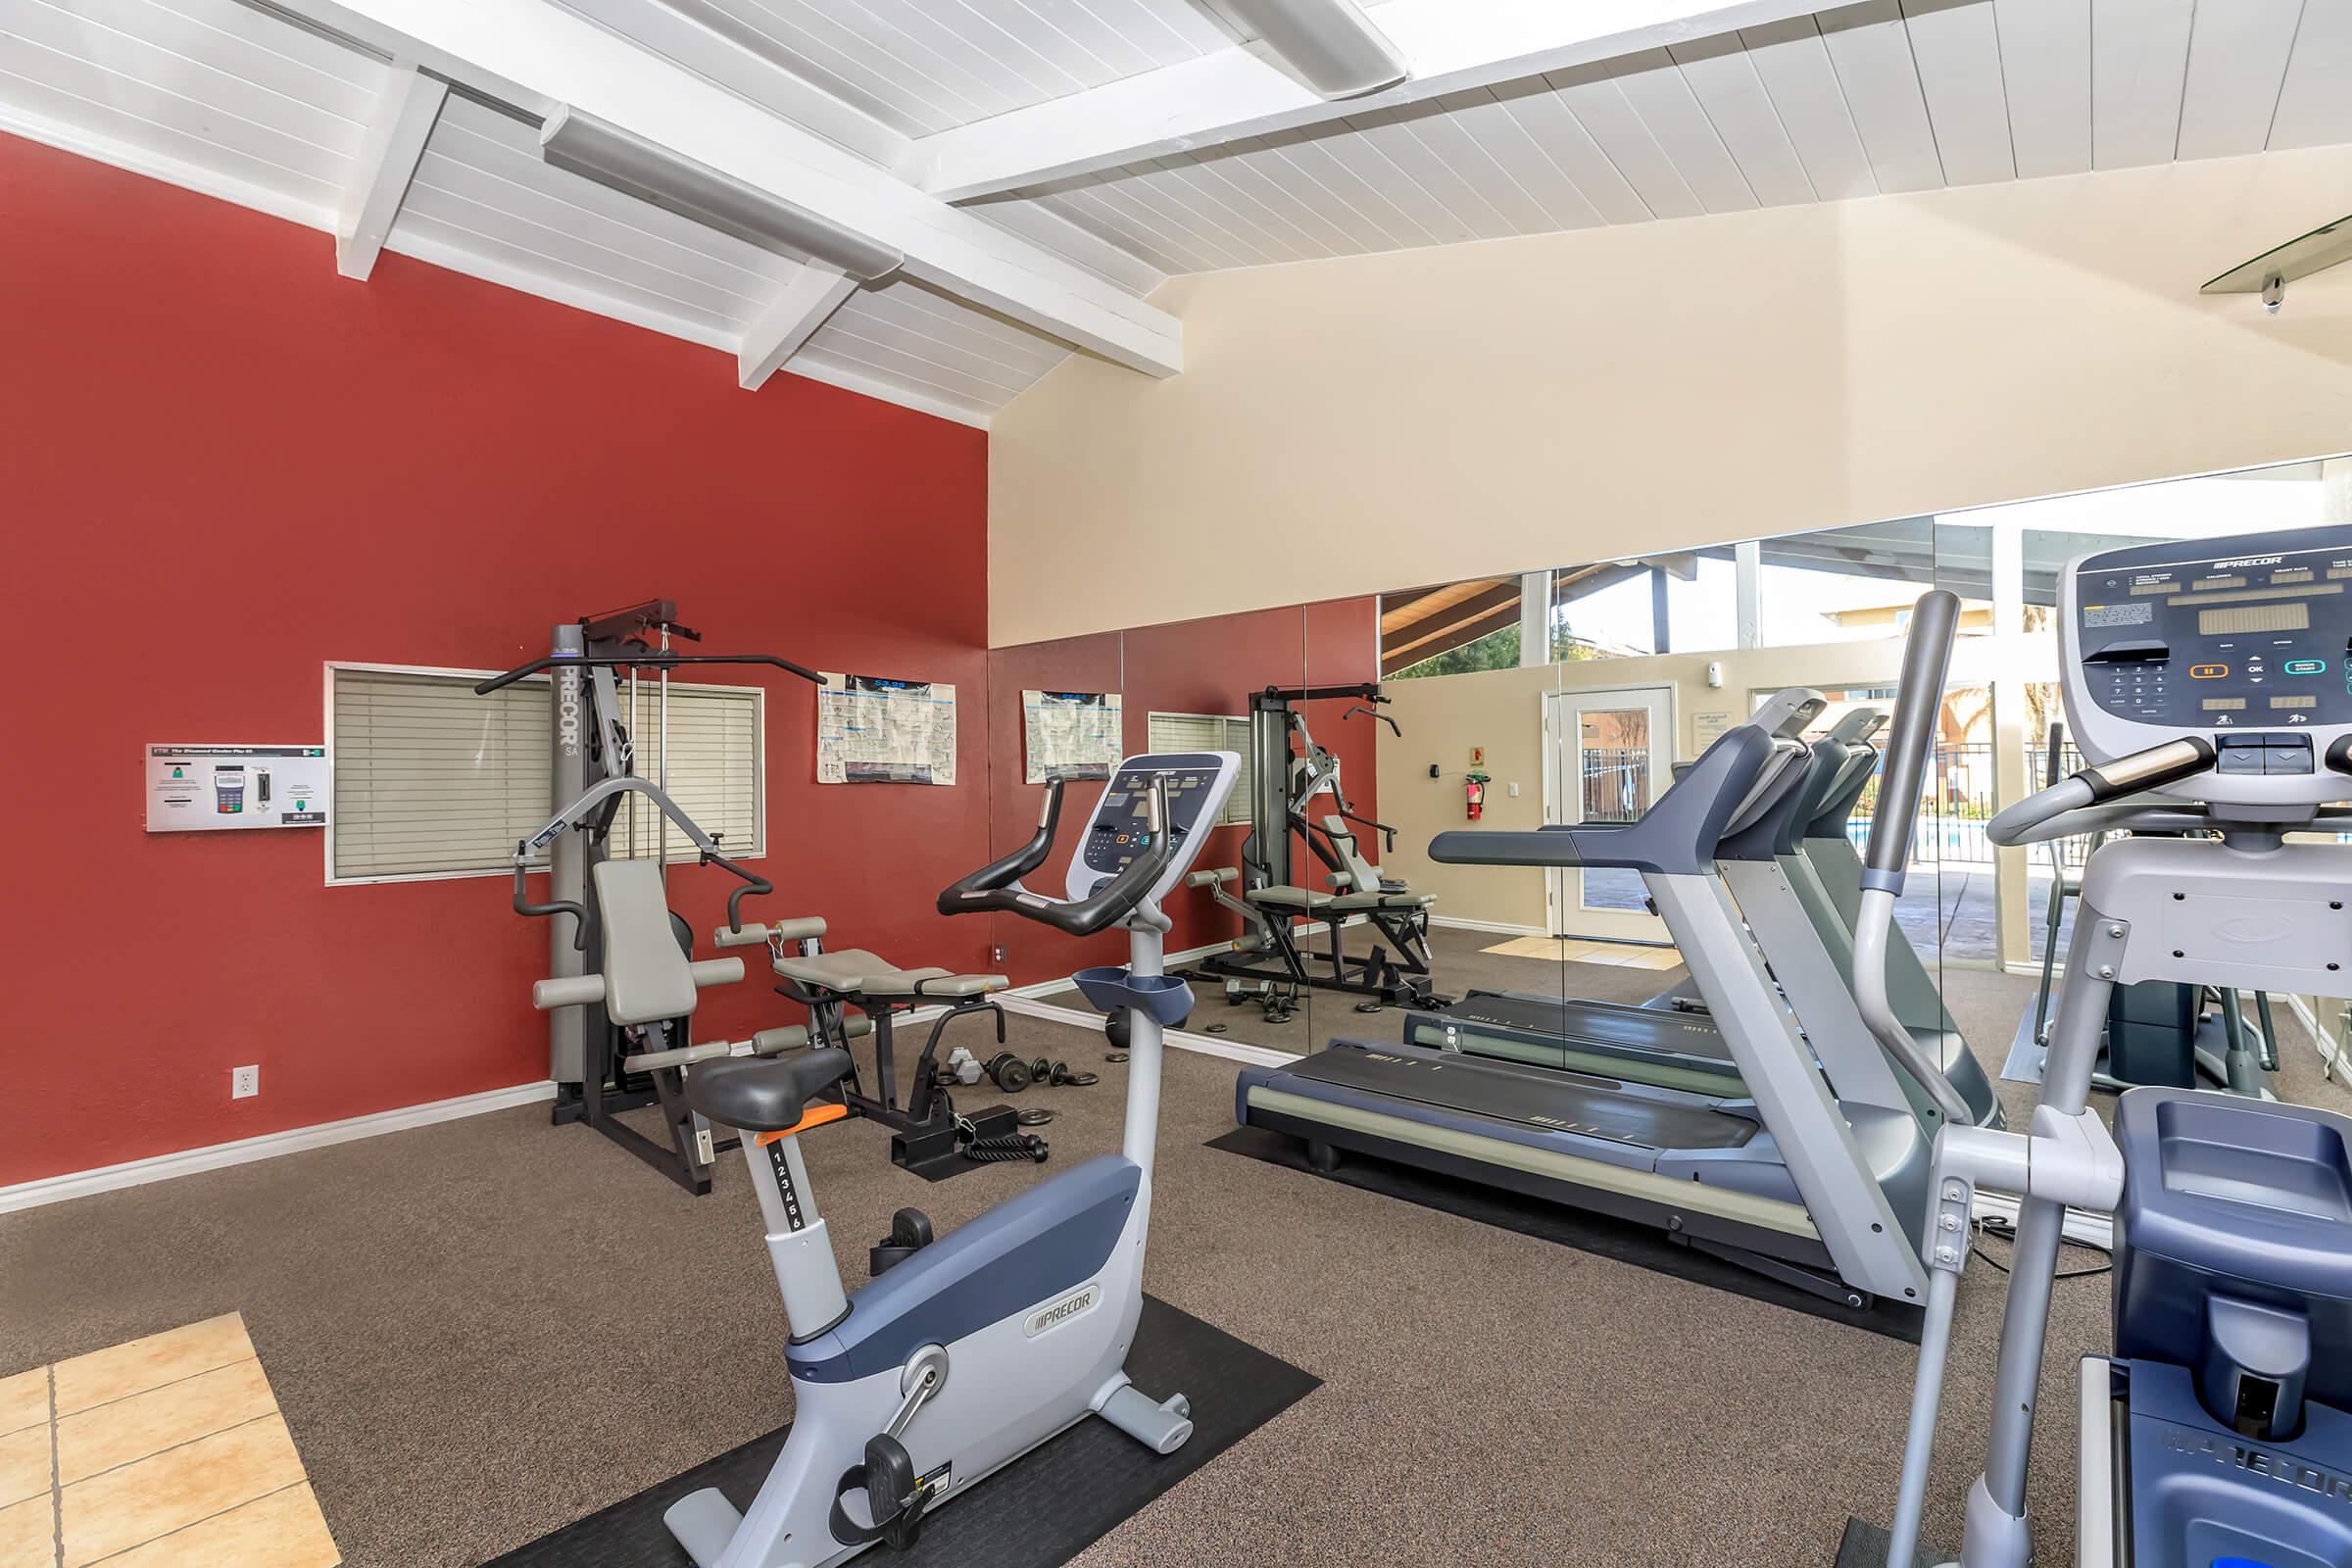  Fitness Center at Ladera Woods in Fremont CA